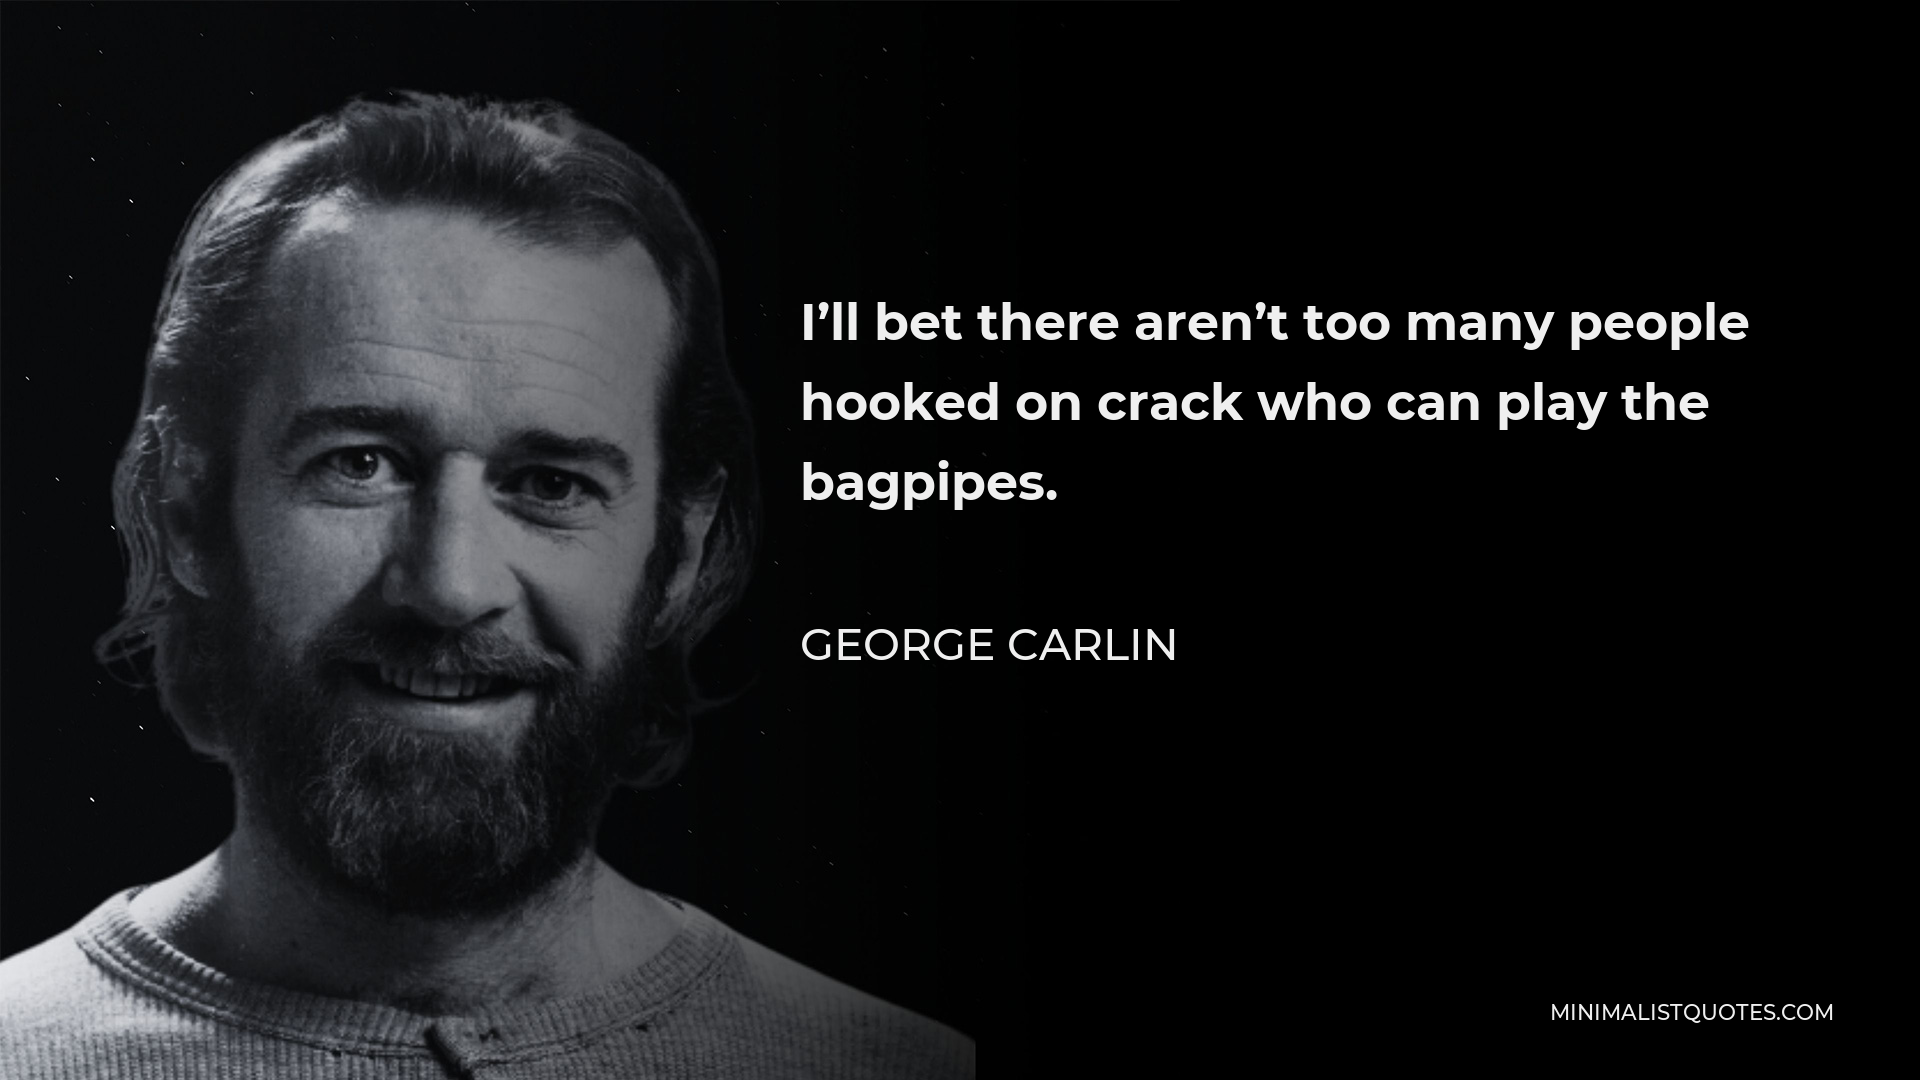 George Carlin Quote - I’ll bet there aren’t too many people hooked on crack who can play the bagpipes.